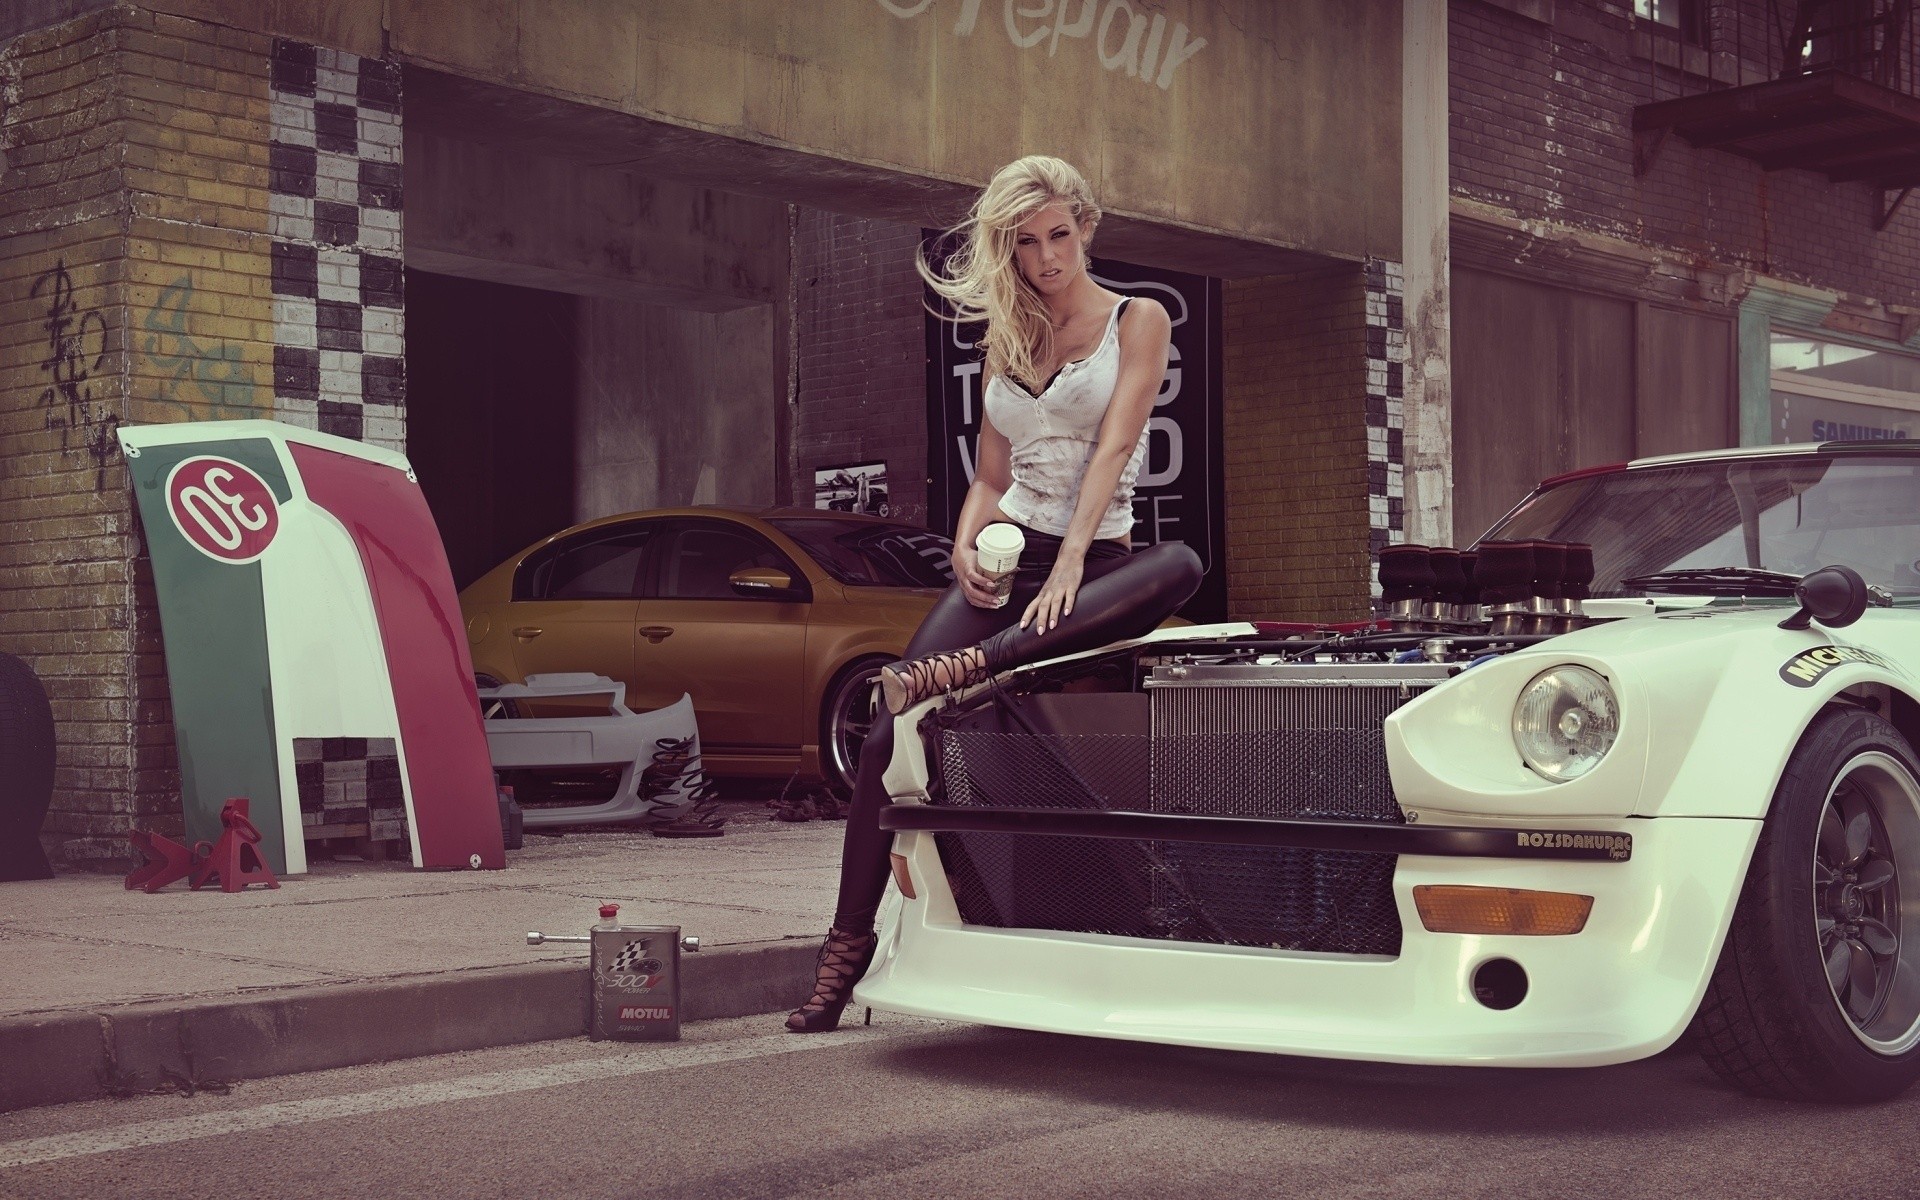 People 1920x1200 car women Leonie Hagmeyer-Reyinger blonde women with cars leather pants  tank top Nissan S30 vehicle Nissan sitting white cars women outdoors outdoors urban